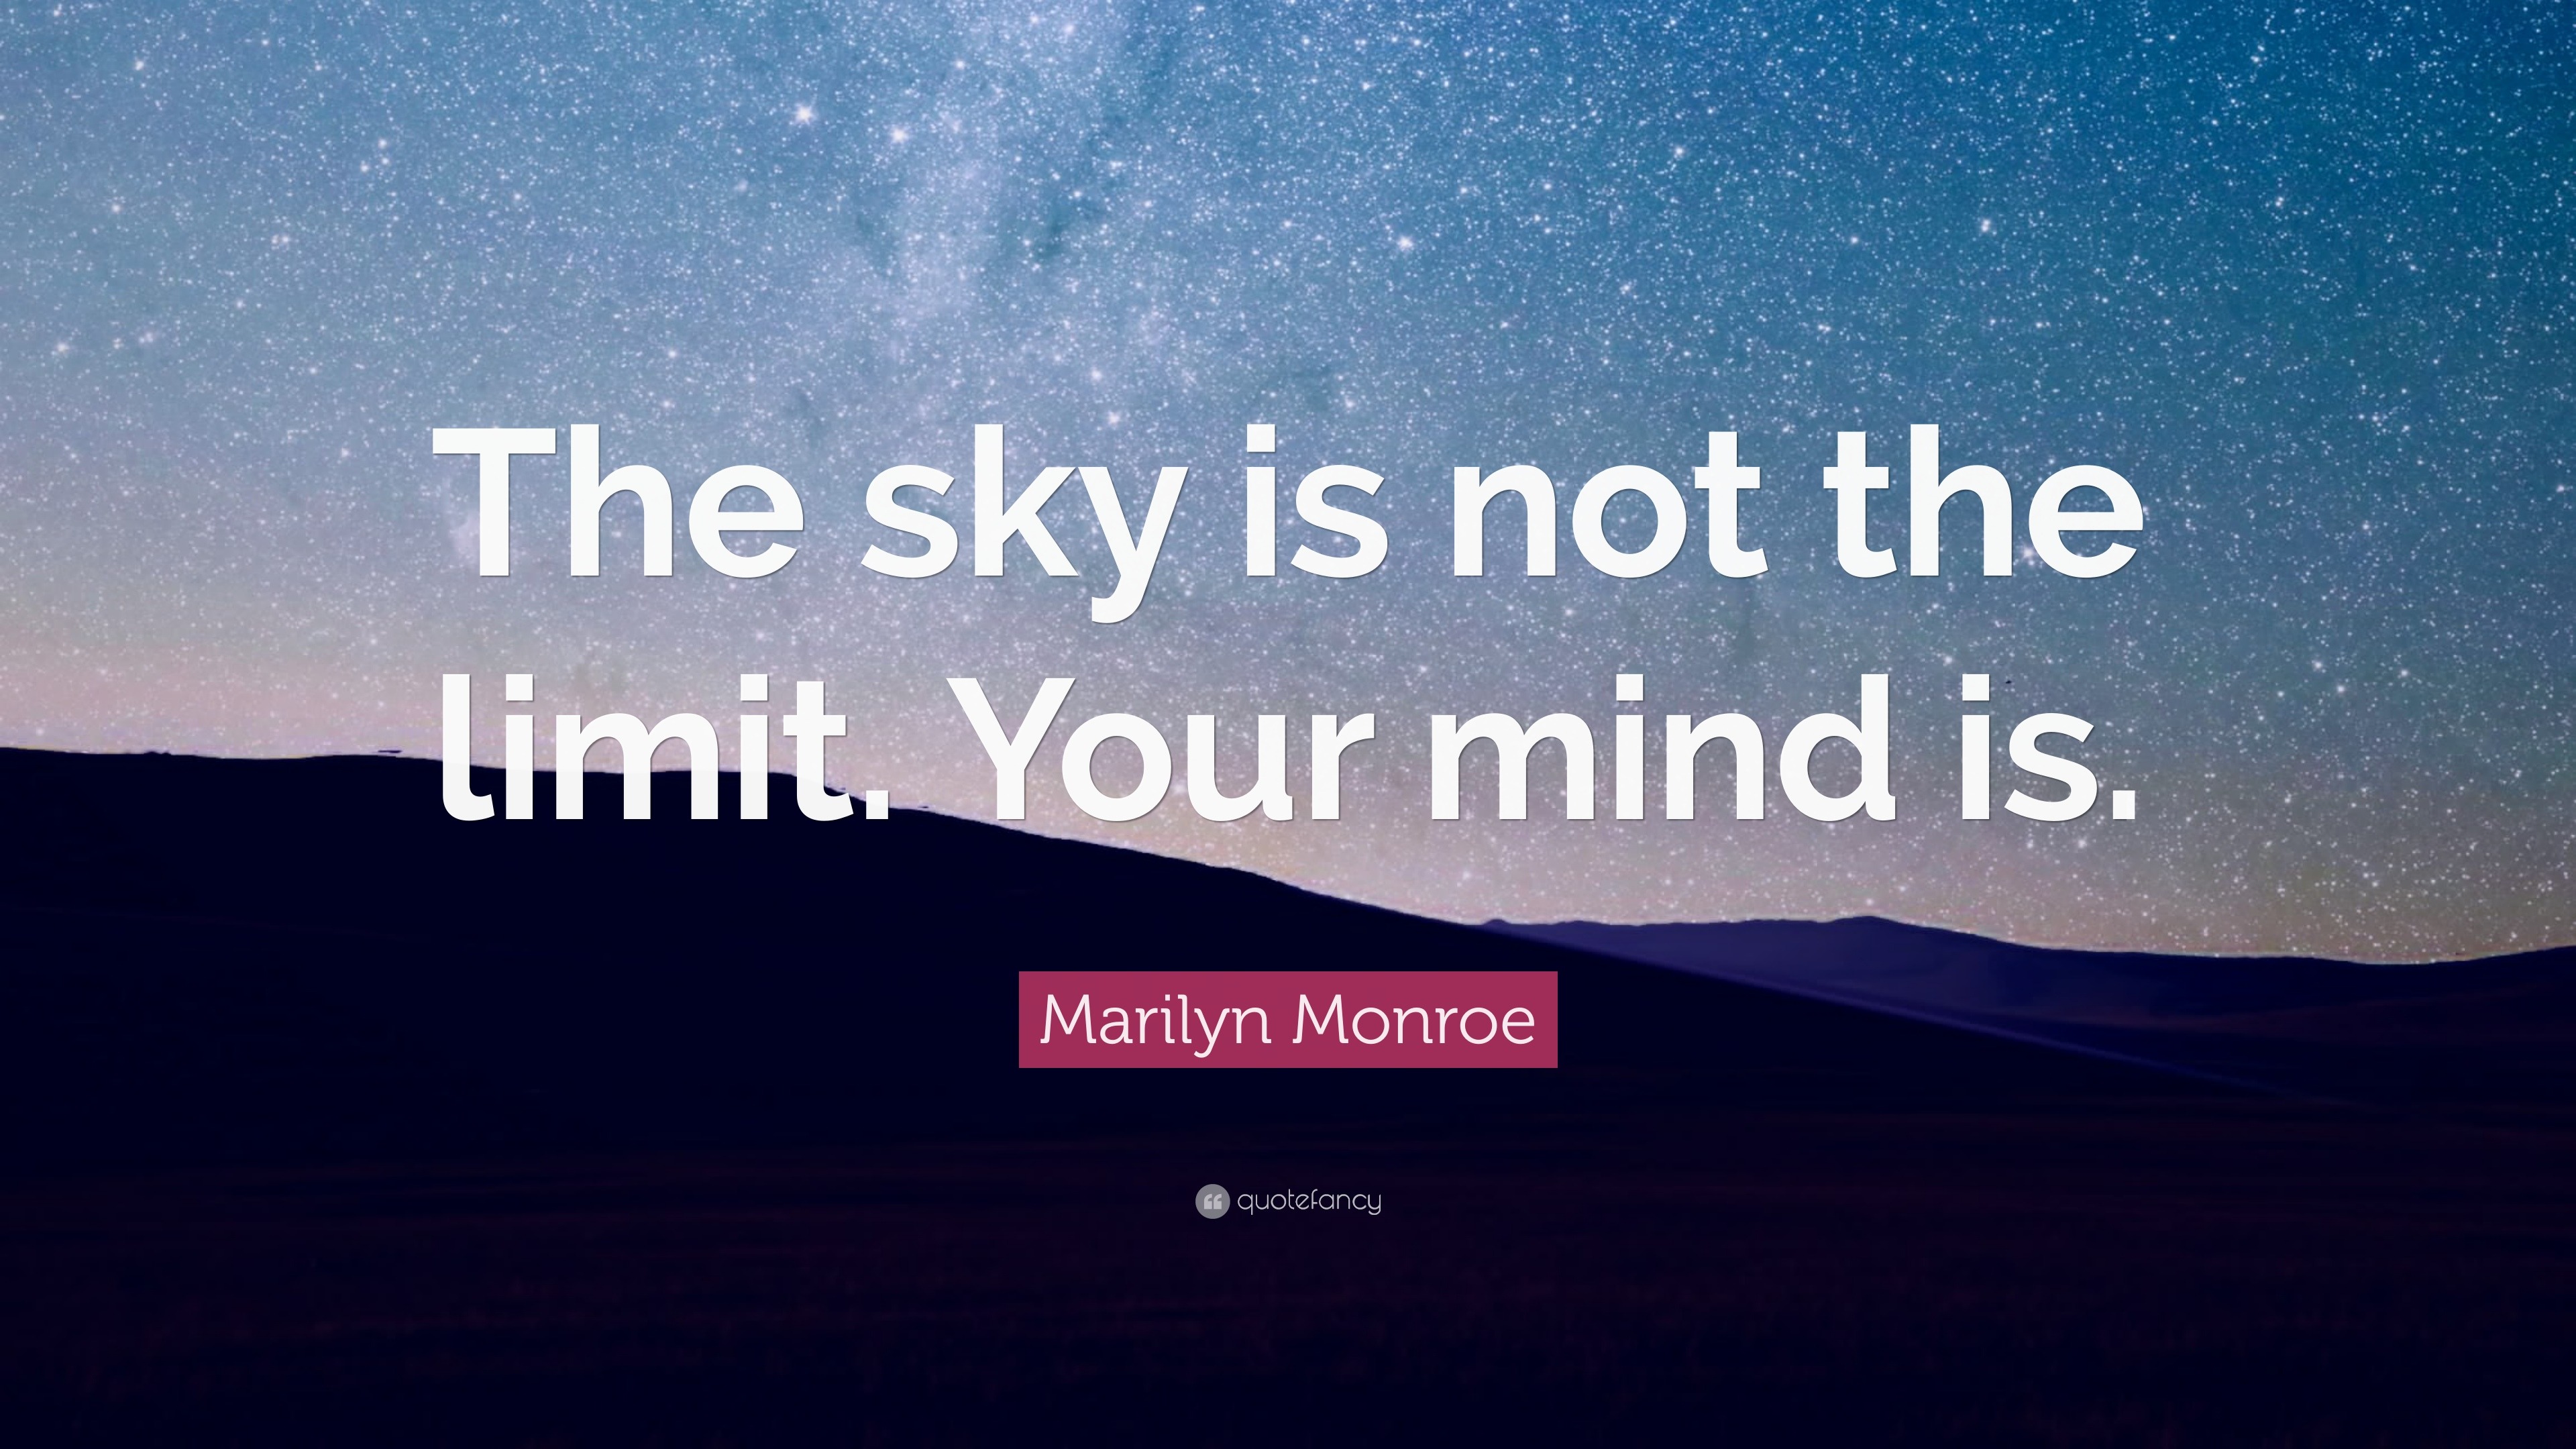 Marilyn Monroe Quote: “The sky is not the limit. Your mind is.”